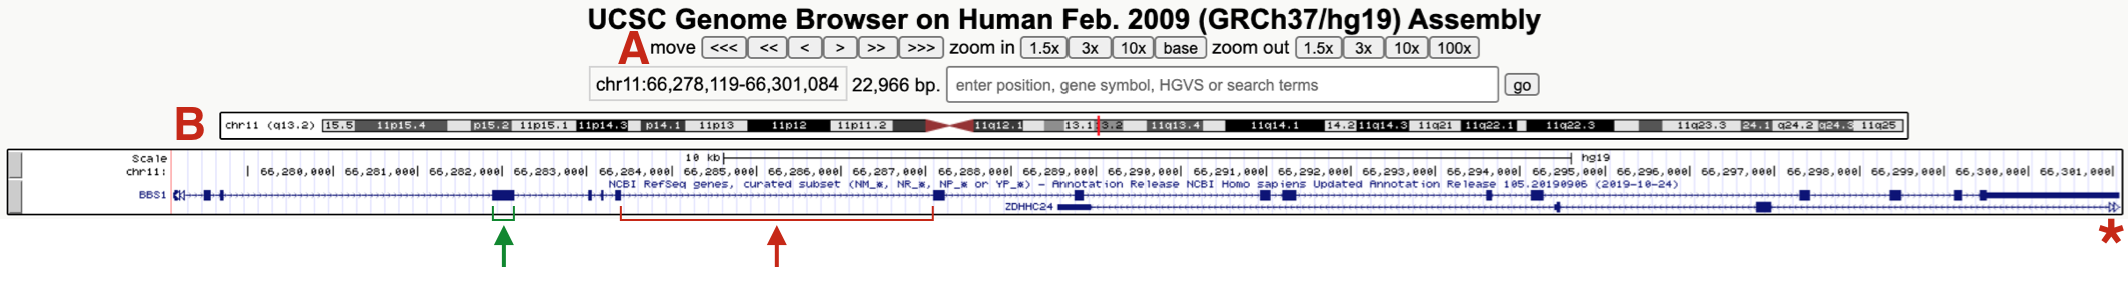 This is what the *BBS1 Gene Structure* named session should look like. One example of an exon and intron are highlighted. The asterix points on the right highlights the open triangles extending from ZDHHC24 indicating that this gene extends further to the right. (A) highlights the navigational toolbar and (B) highights the schematic of the chromosome where BBS1 resides. One exon (green bracket) and one intron (red bracket) are also shown.